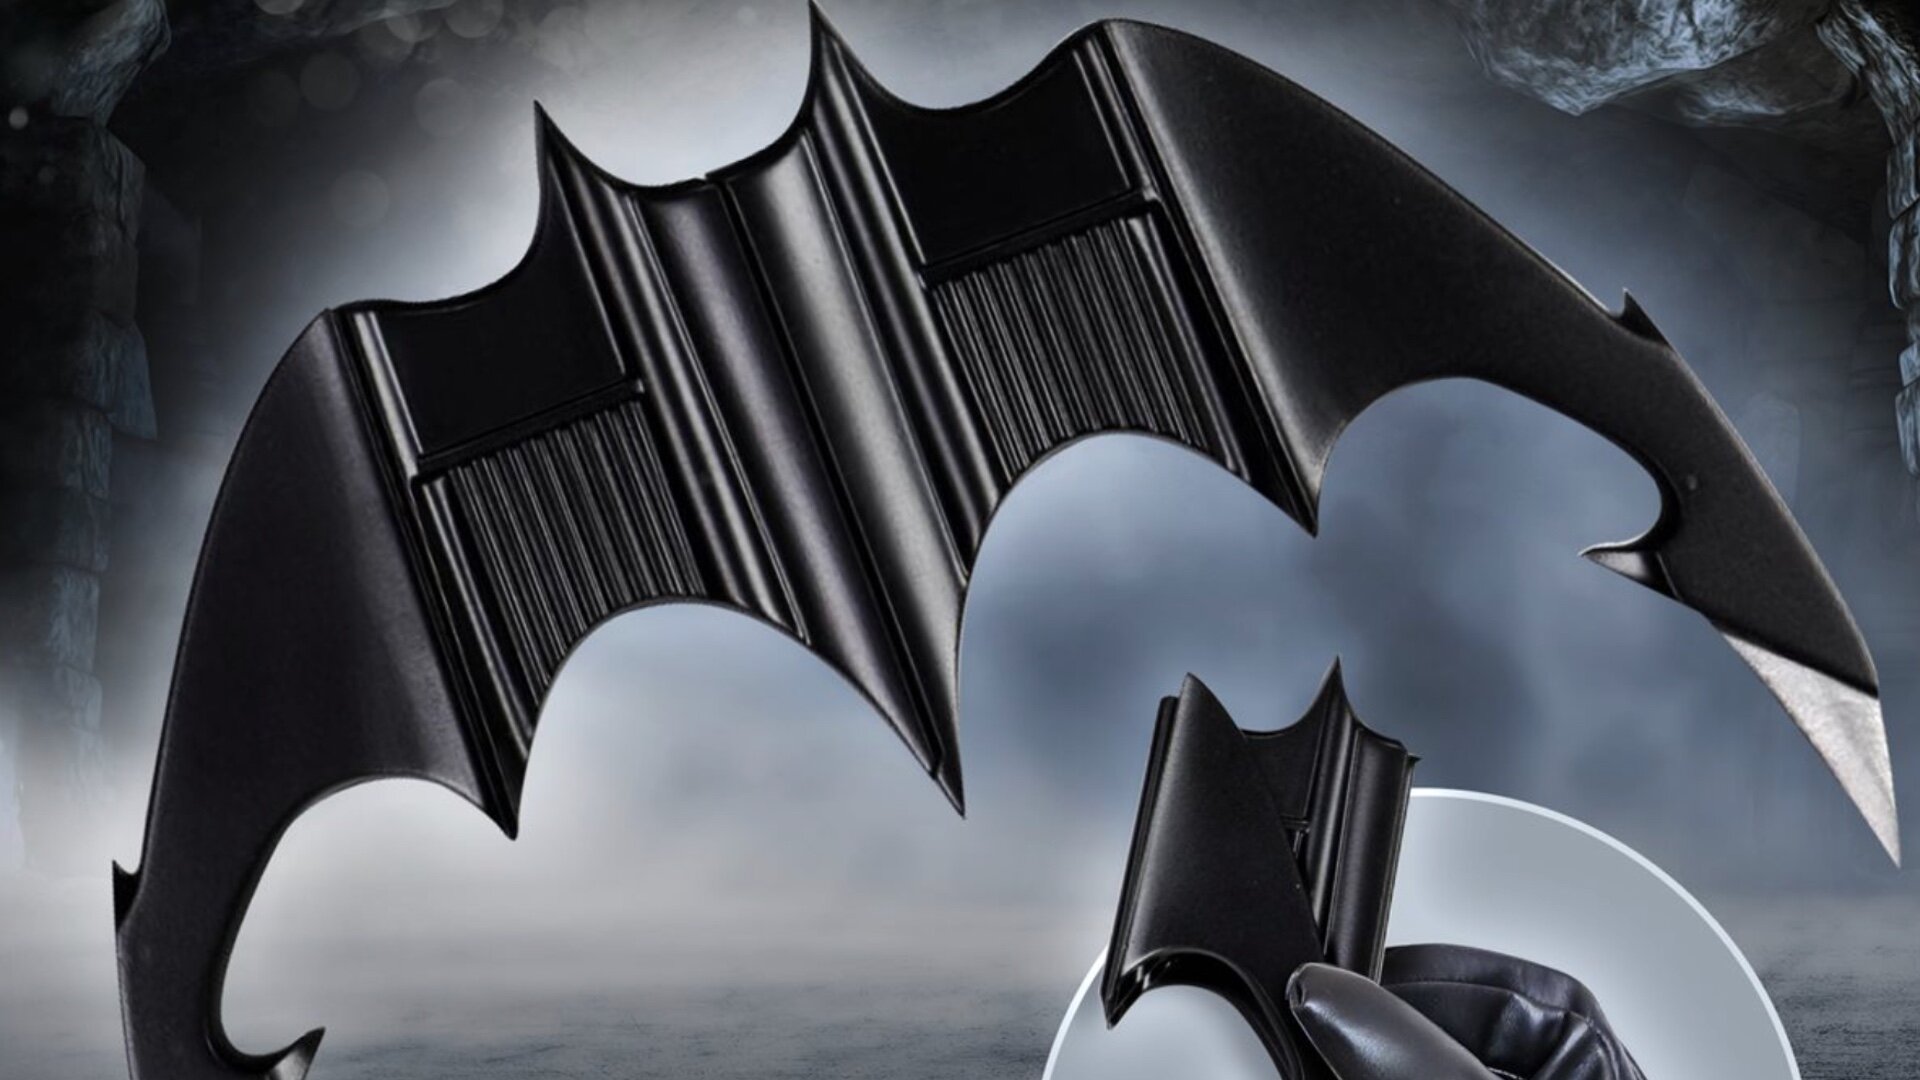 BATMAN 1989 Movie Batarang Prop Replica Is Up For Pre Order And It's Affordable